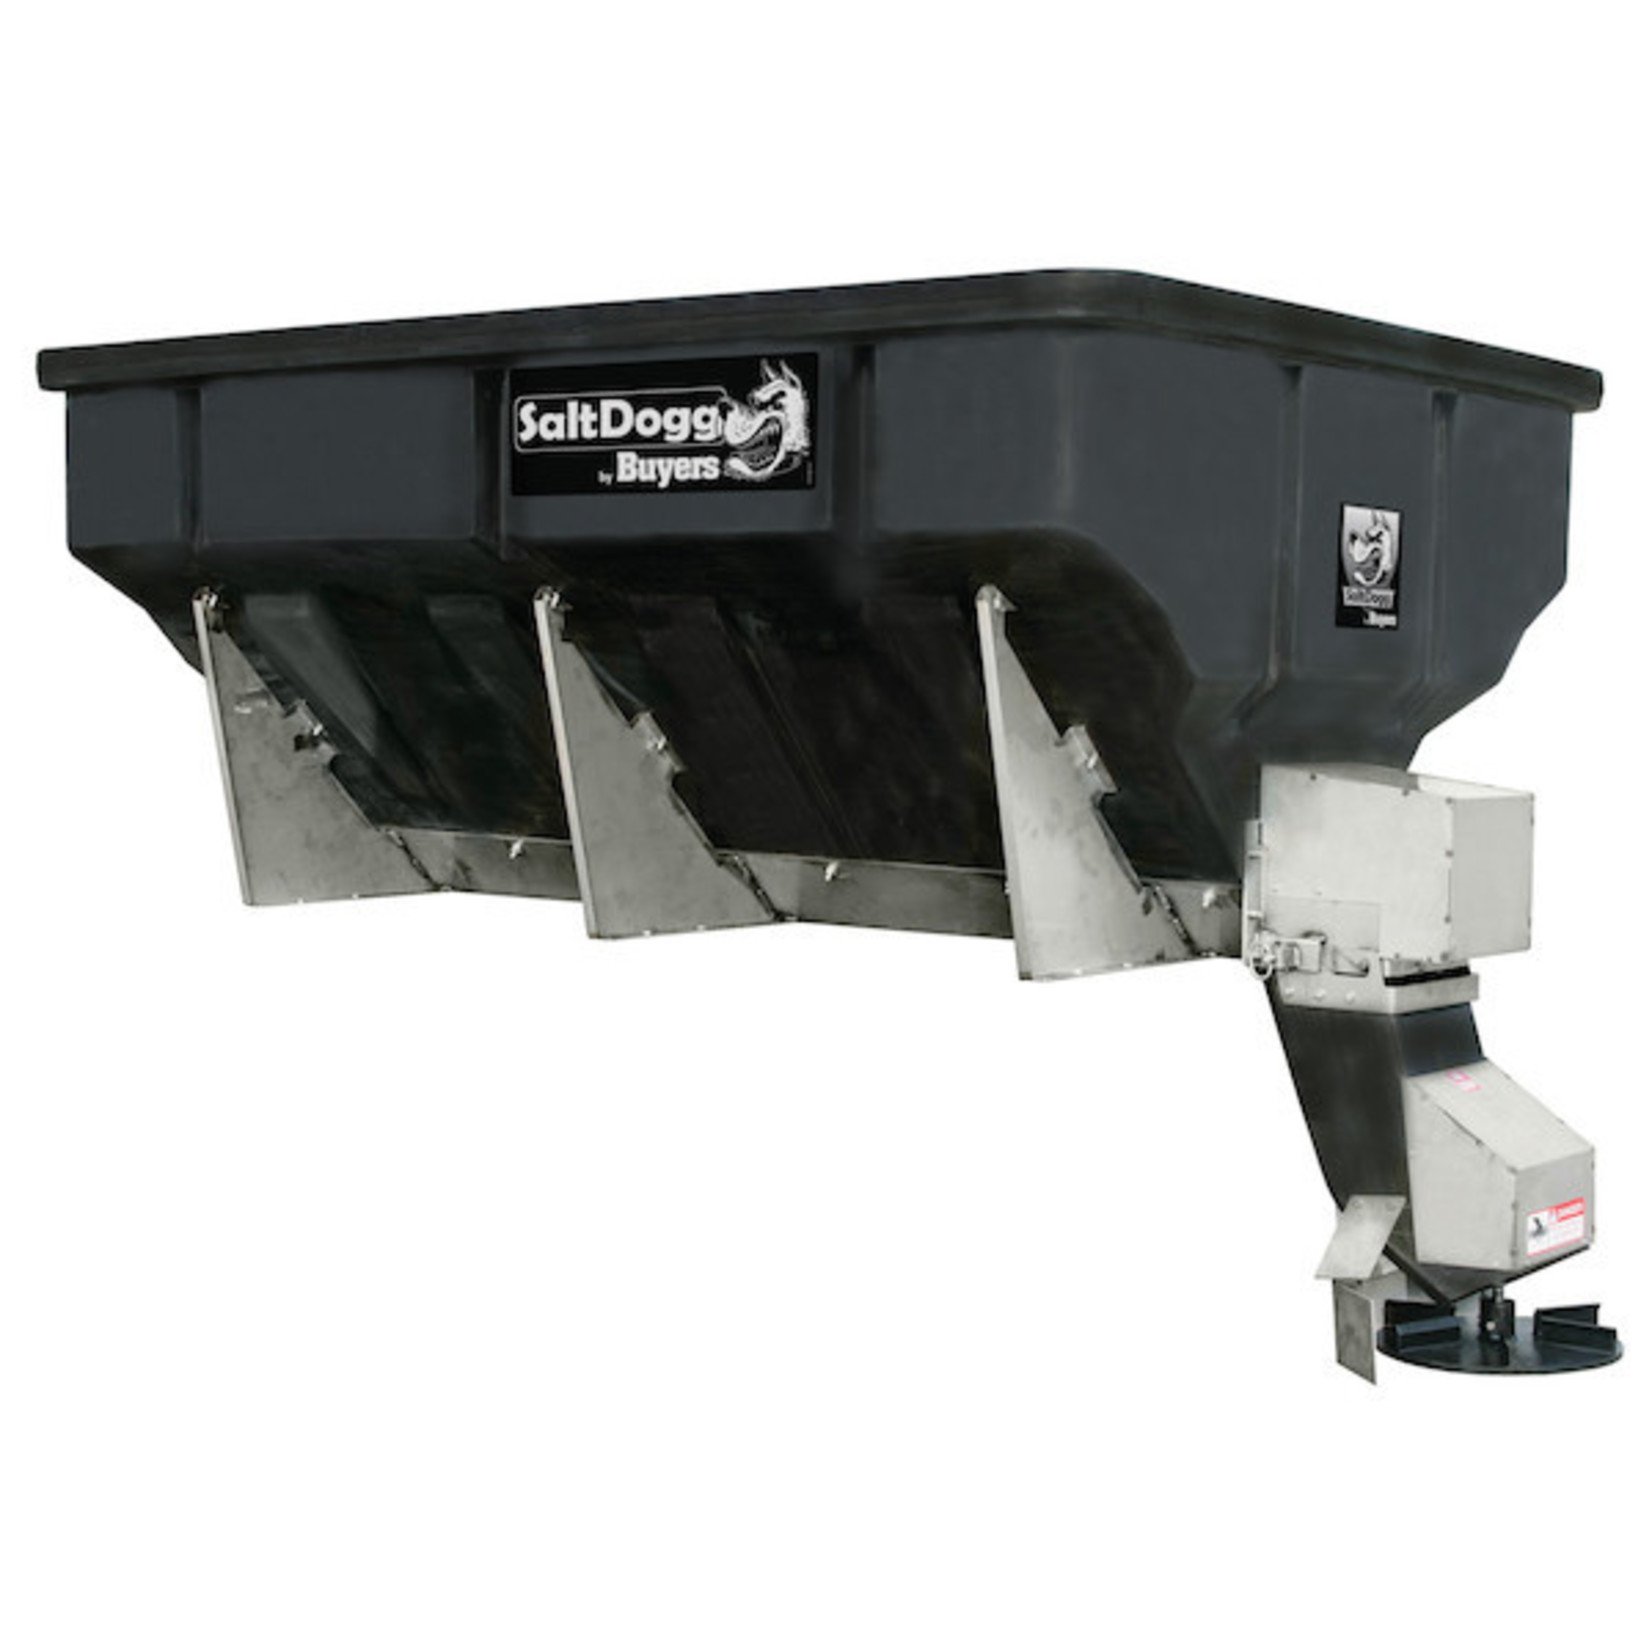 SaltDogg SaltDogg 4.0 Cubic Yard Electric Black Poly/Stainless Steel Hopper Spreader with Auger